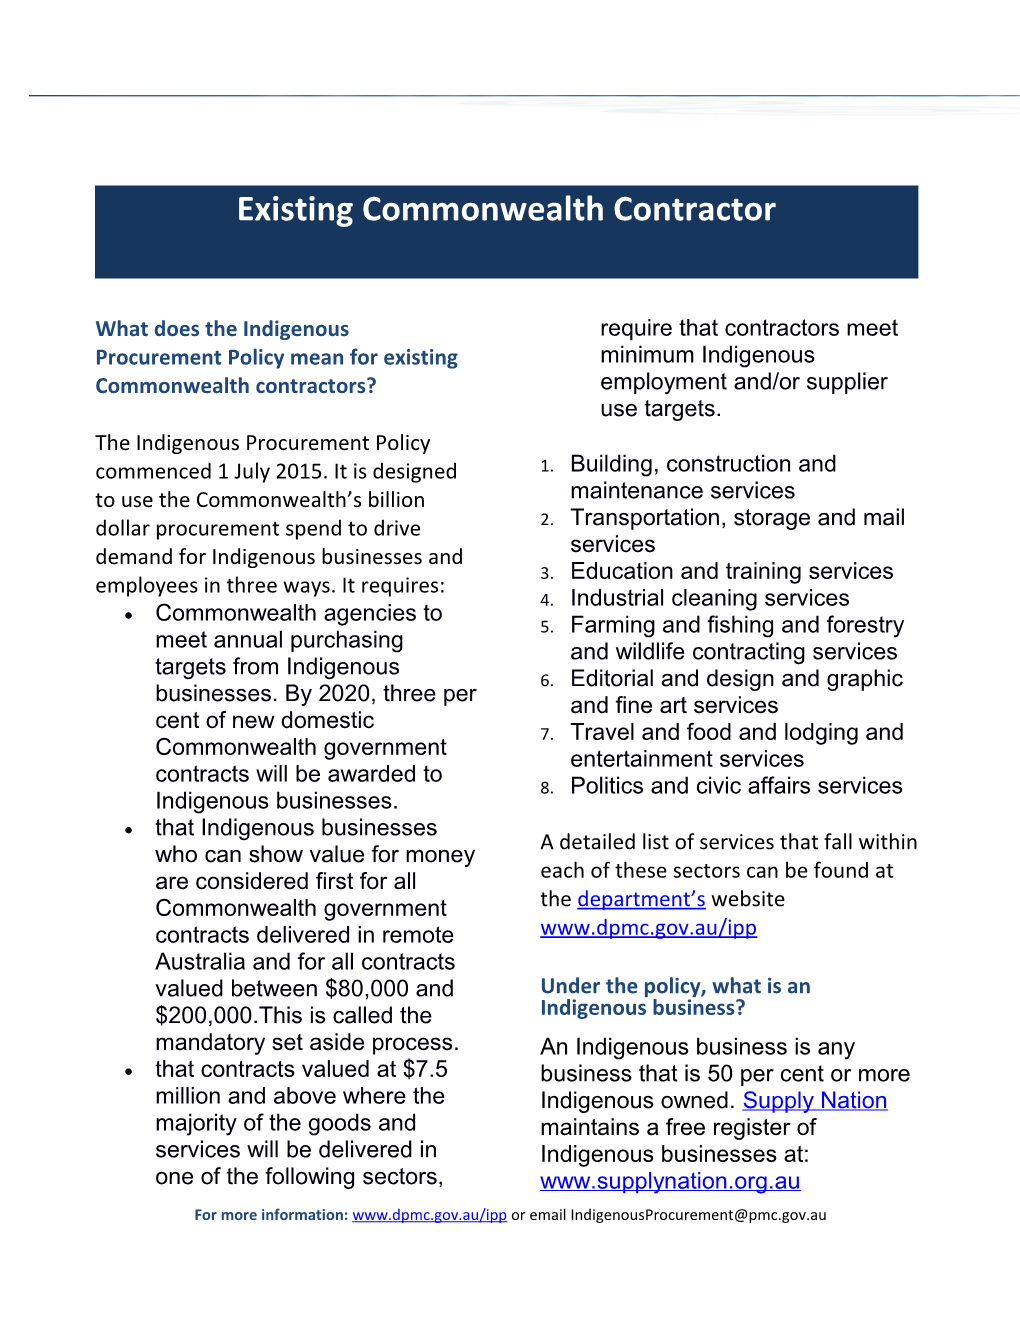 What Does the Indigenous Procurement Policymean for Existing Commonwealth Contractors?